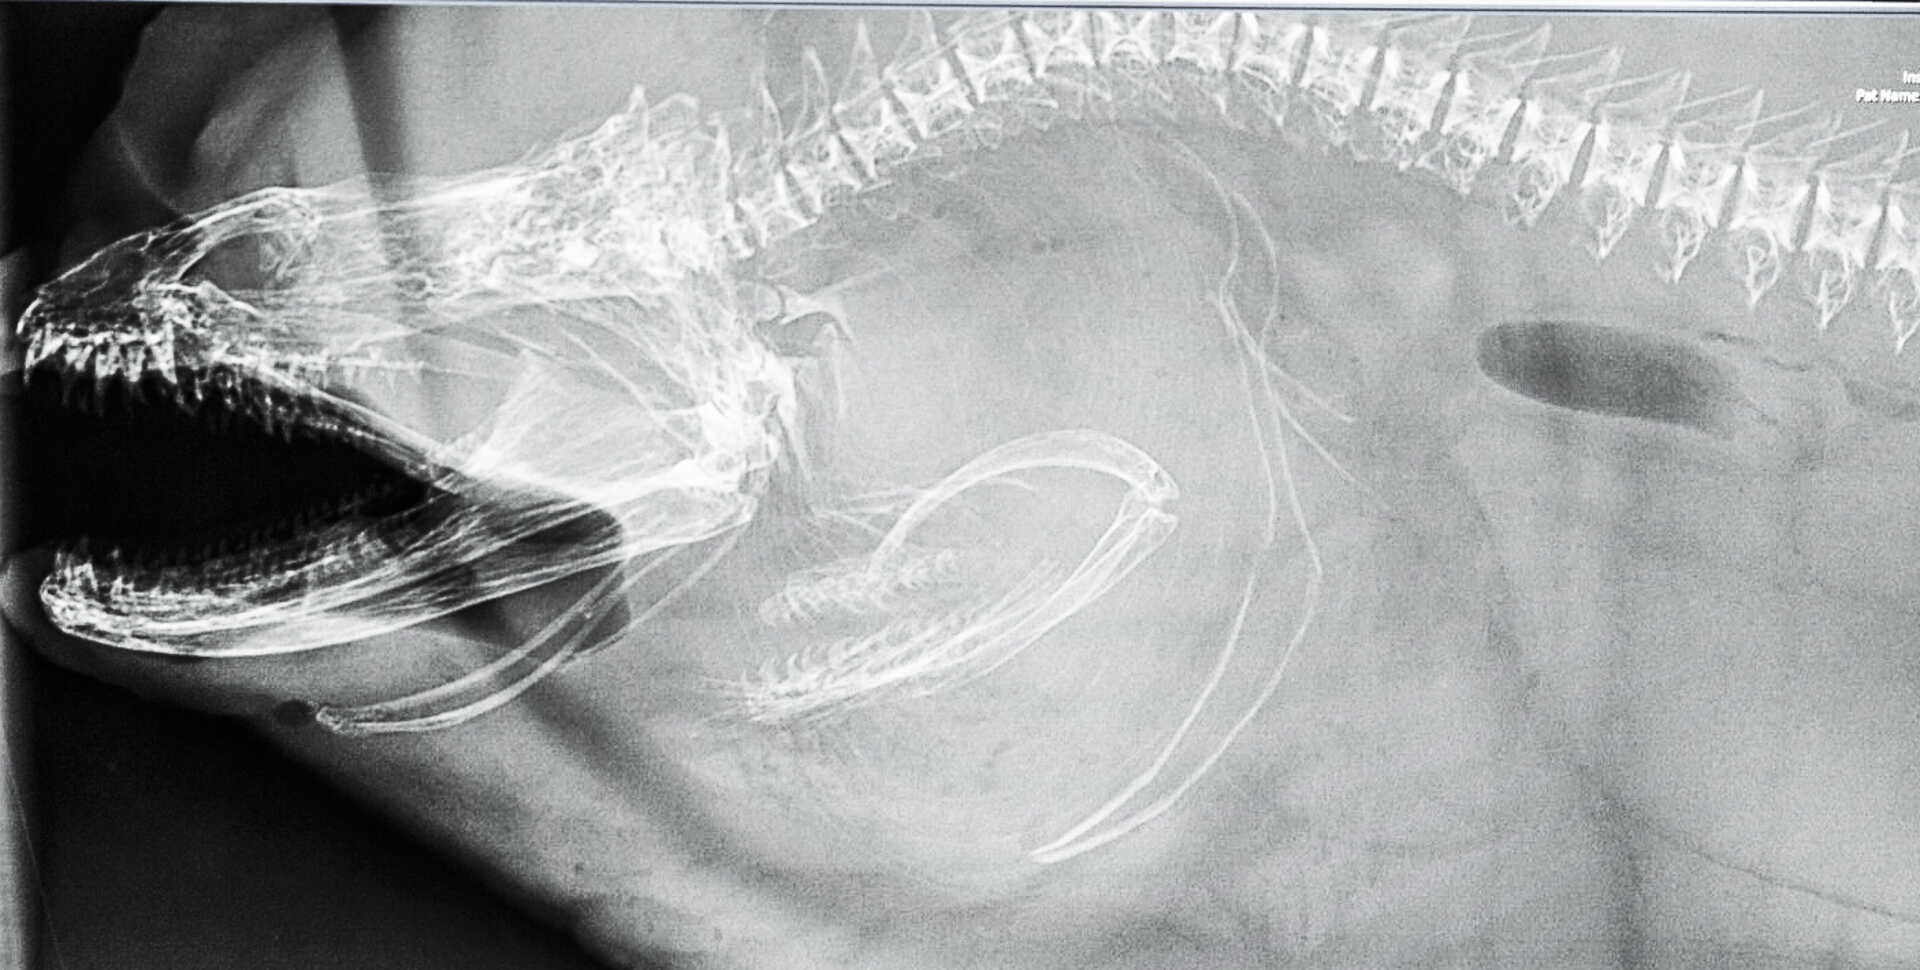 Eel x-ray shows second set of jaws slightly lower and to the right of the front jaws and teeth.